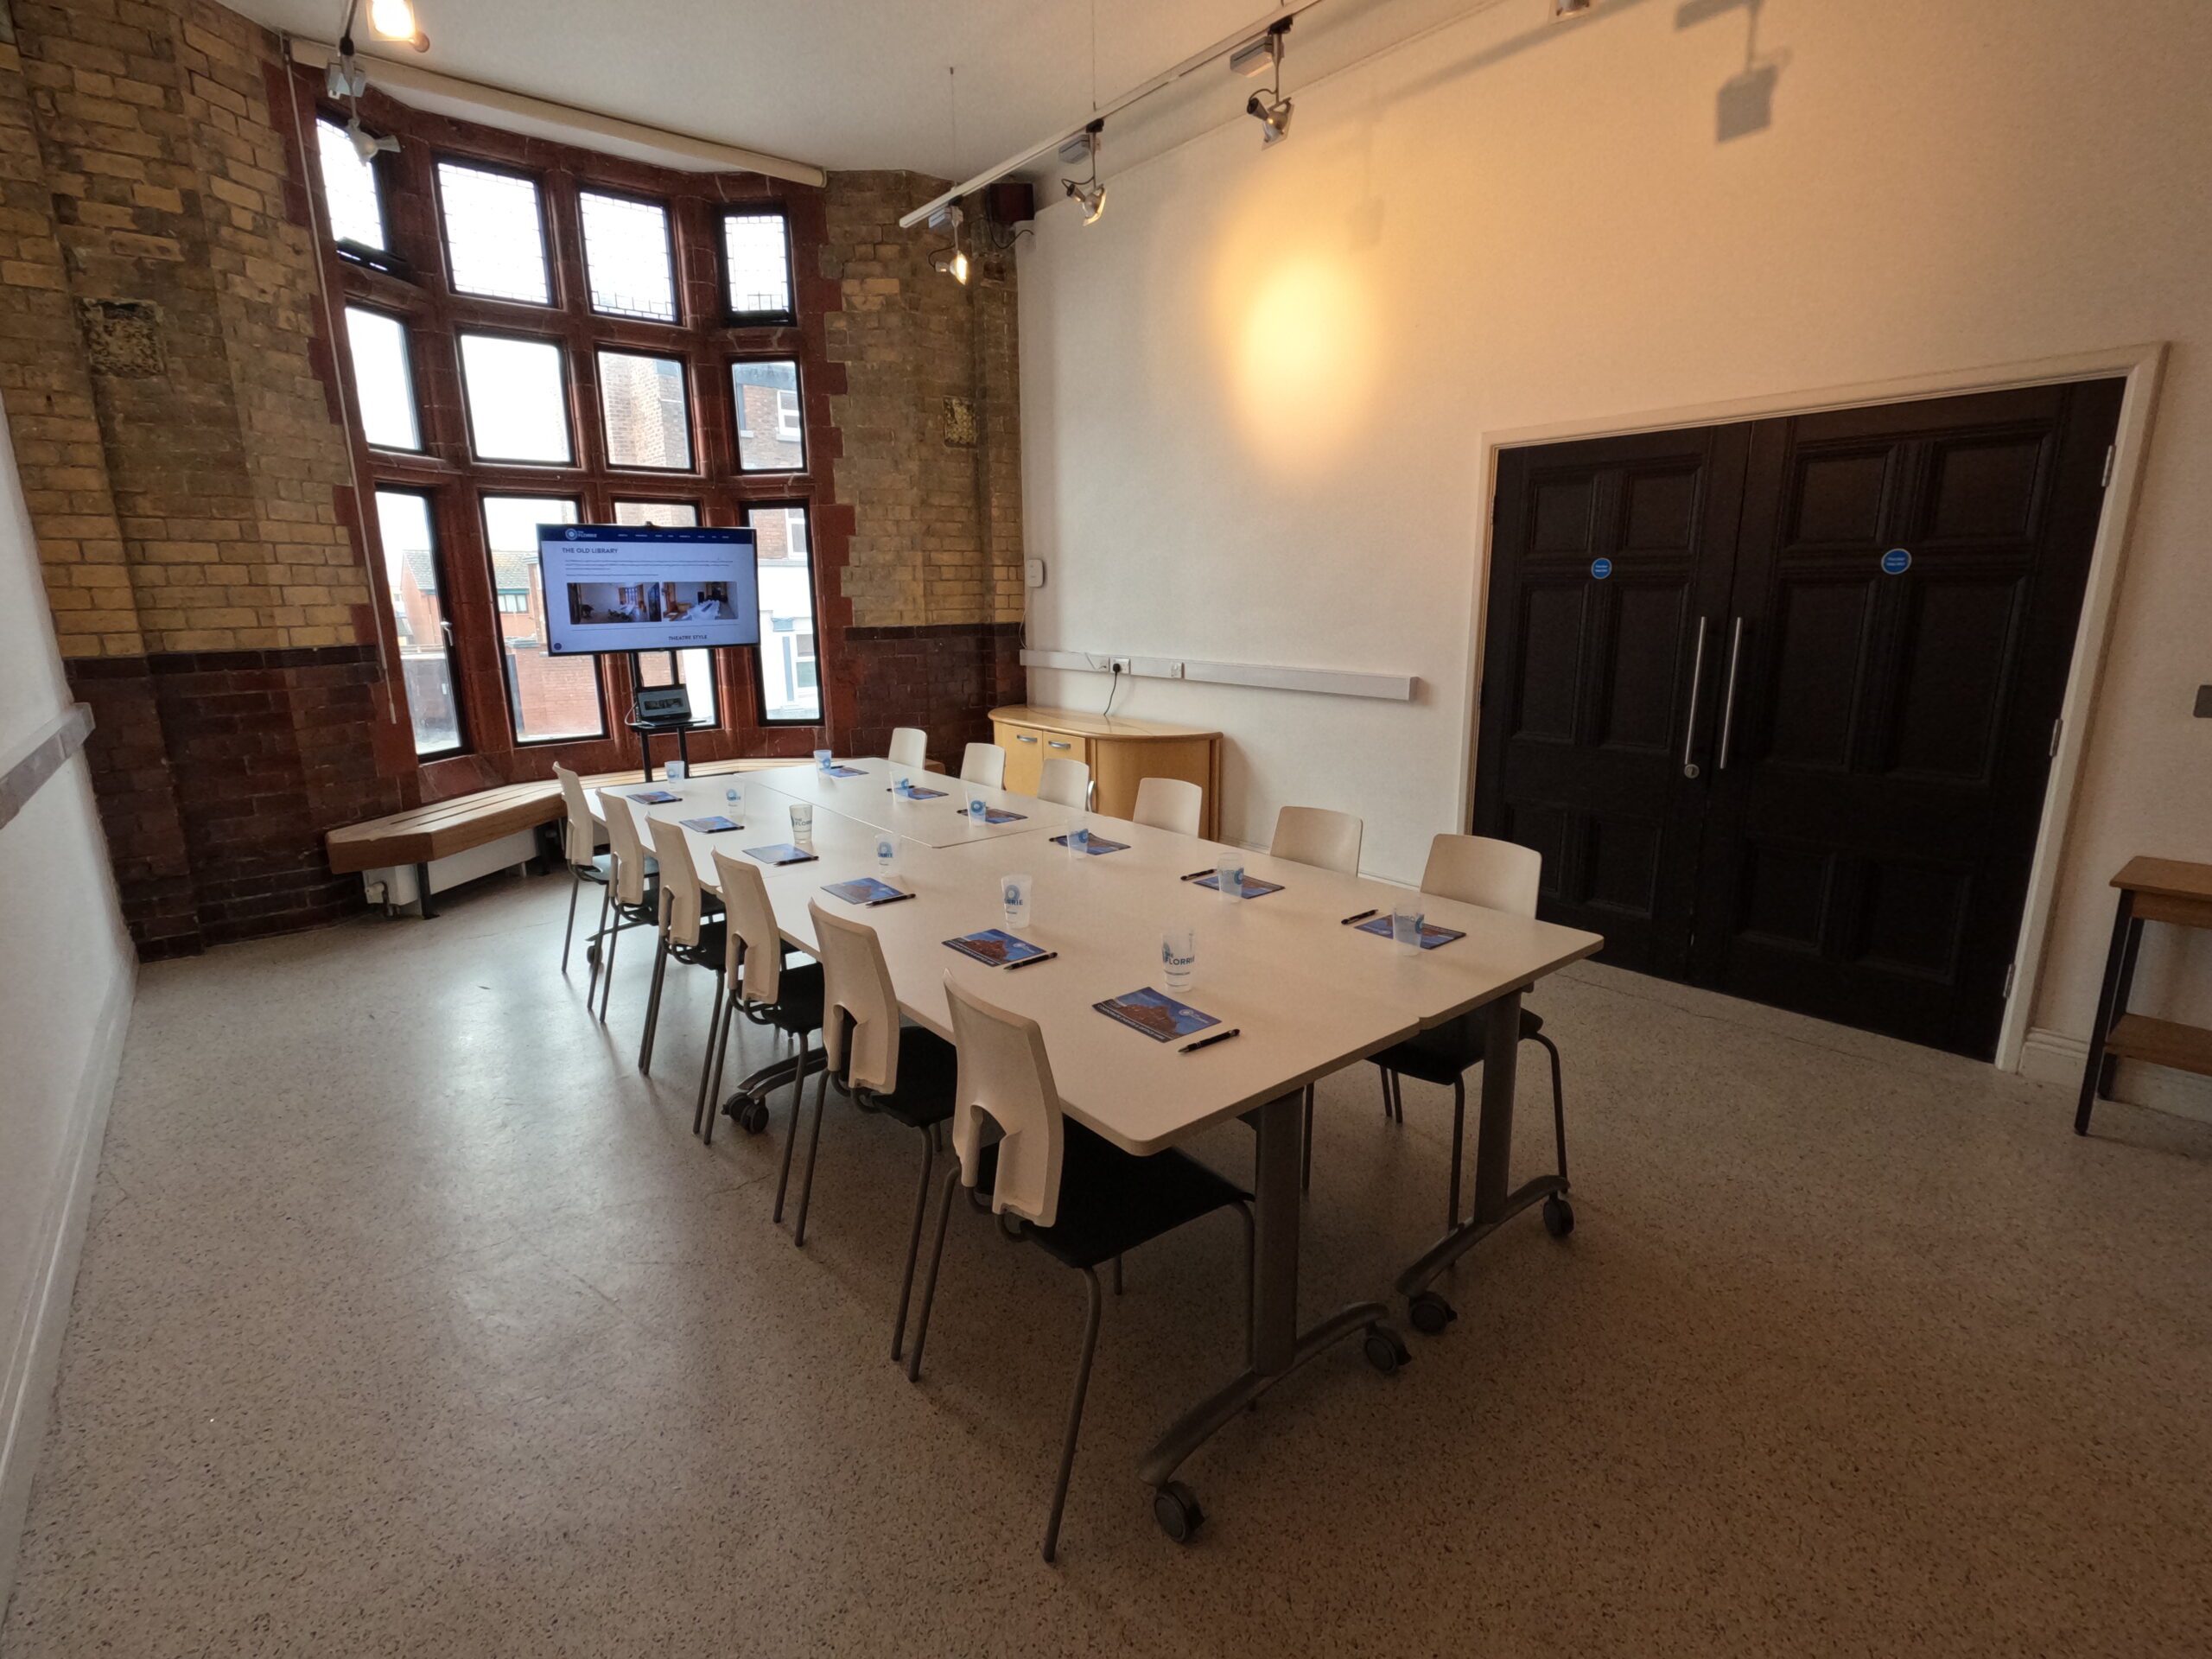 The Old Library event space at The Florrie.